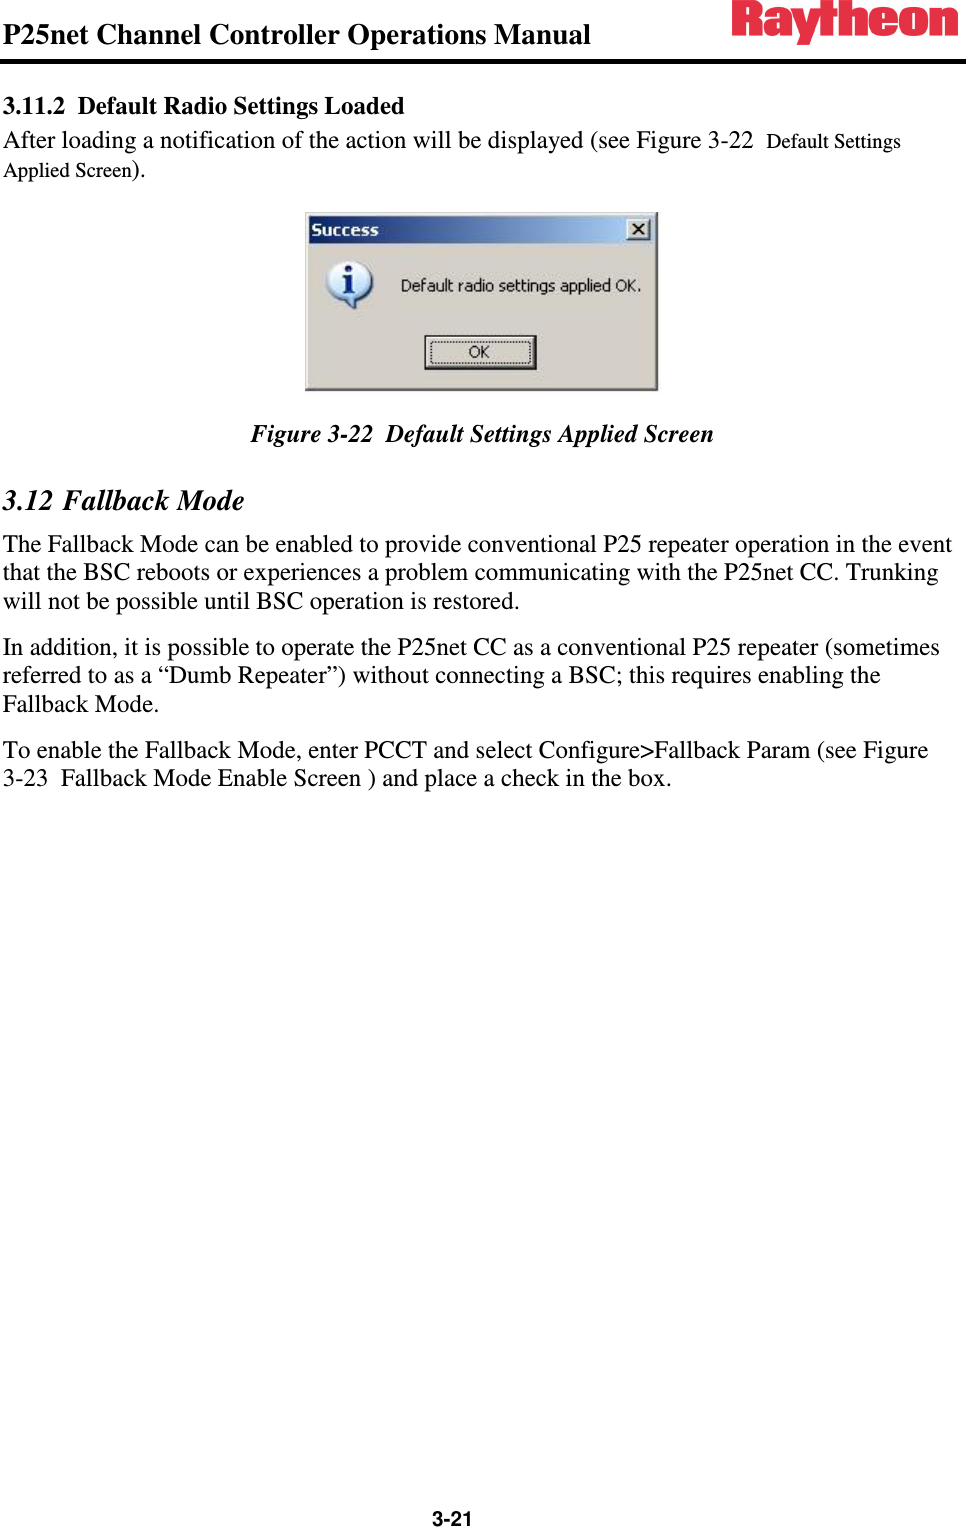 P25net Channel Controller Operations Manual                 3-21 3.11.2 Default Radio Settings Loaded After loading a notification of the action will be displayed (see Figure 3-22  Default Settings Applied Screen).  Figure 3-22  Default Settings Applied Screen 3.12 Fallback Mode The Fallback Mode can be enabled to provide conventional P25 repeater operation in the event that the BSC reboots or experiences a problem communicating with the P25net CC. Trunking will not be possible until BSC operation is restored.  In addition, it is possible to operate the P25net CC as a conventional P25 repeater (sometimes referred to as a “Dumb Repeater”) without connecting a BSC; this requires enabling the Fallback Mode. To enable the Fallback Mode, enter PCCT and select Configure&gt;Fallback Param (see Figure 3-23  Fallback Mode Enable Screen ) and place a check in the box.  